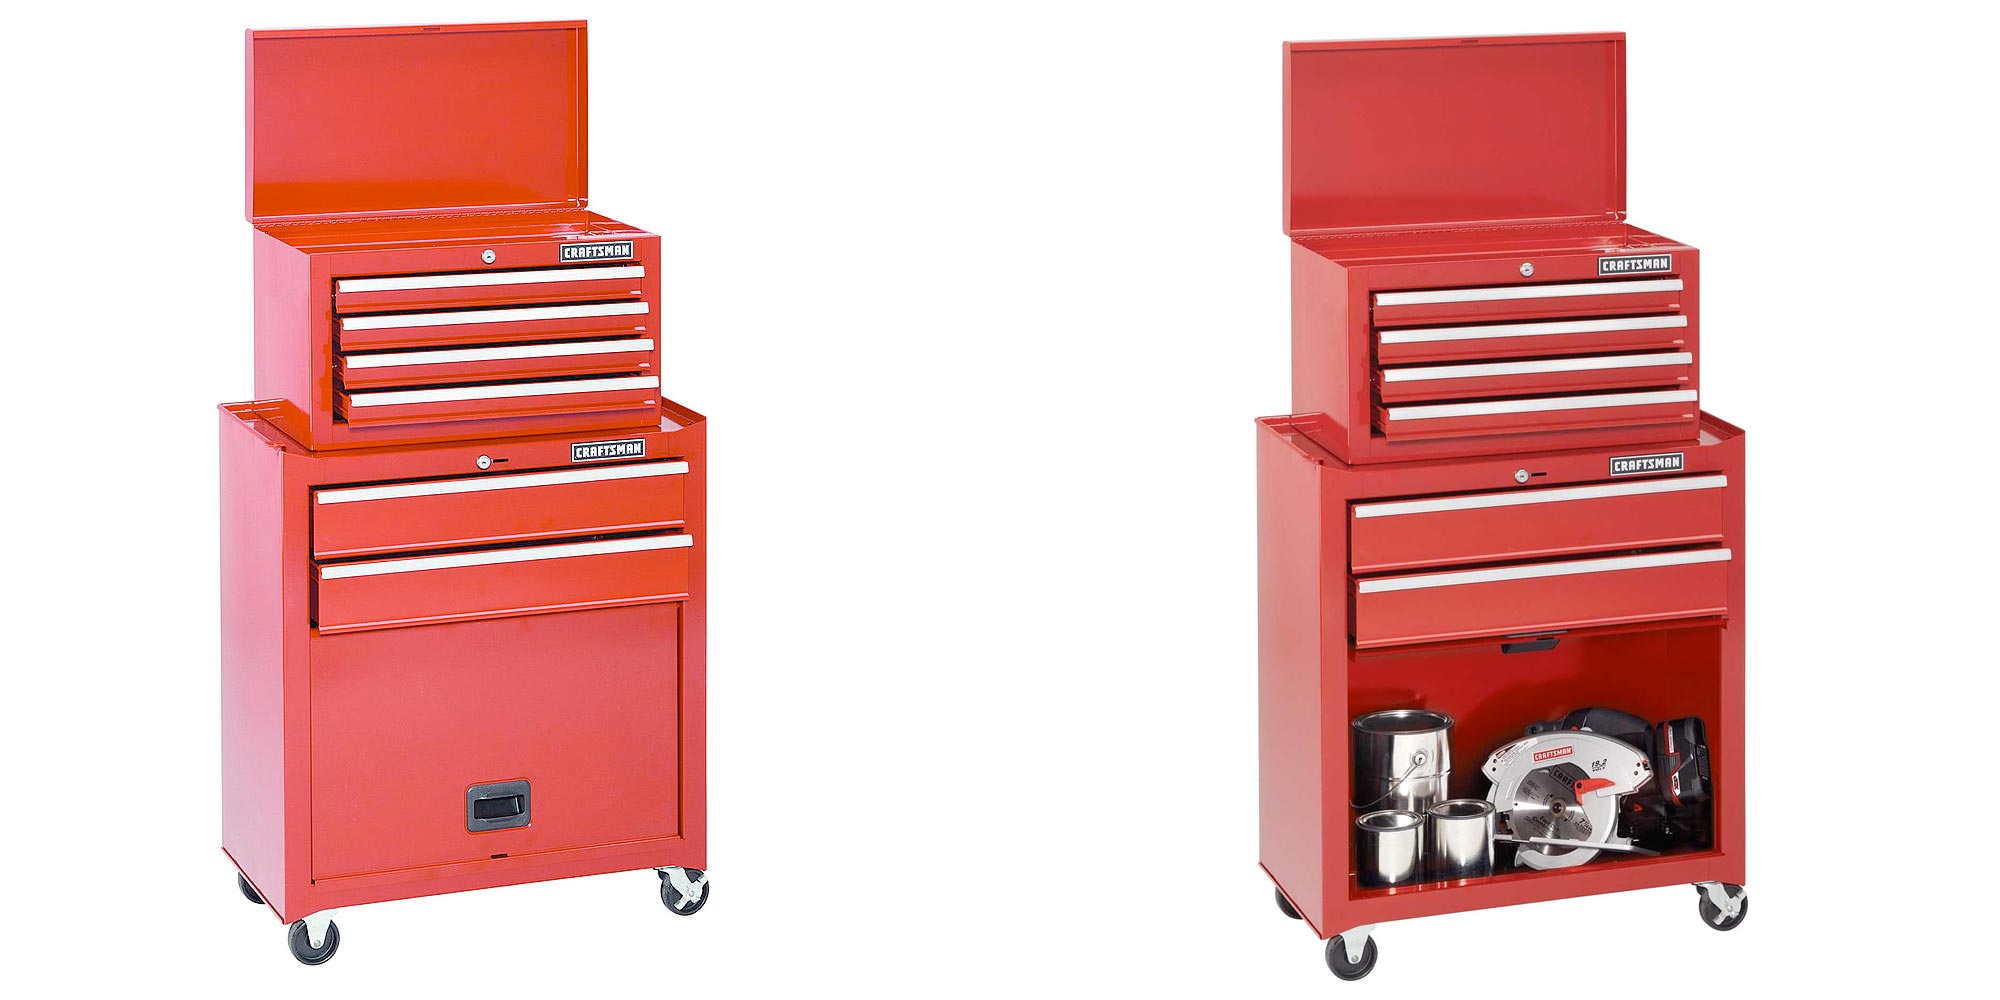 This Craftsman 6-drawer tool chest is perfect for organizing the garage ...